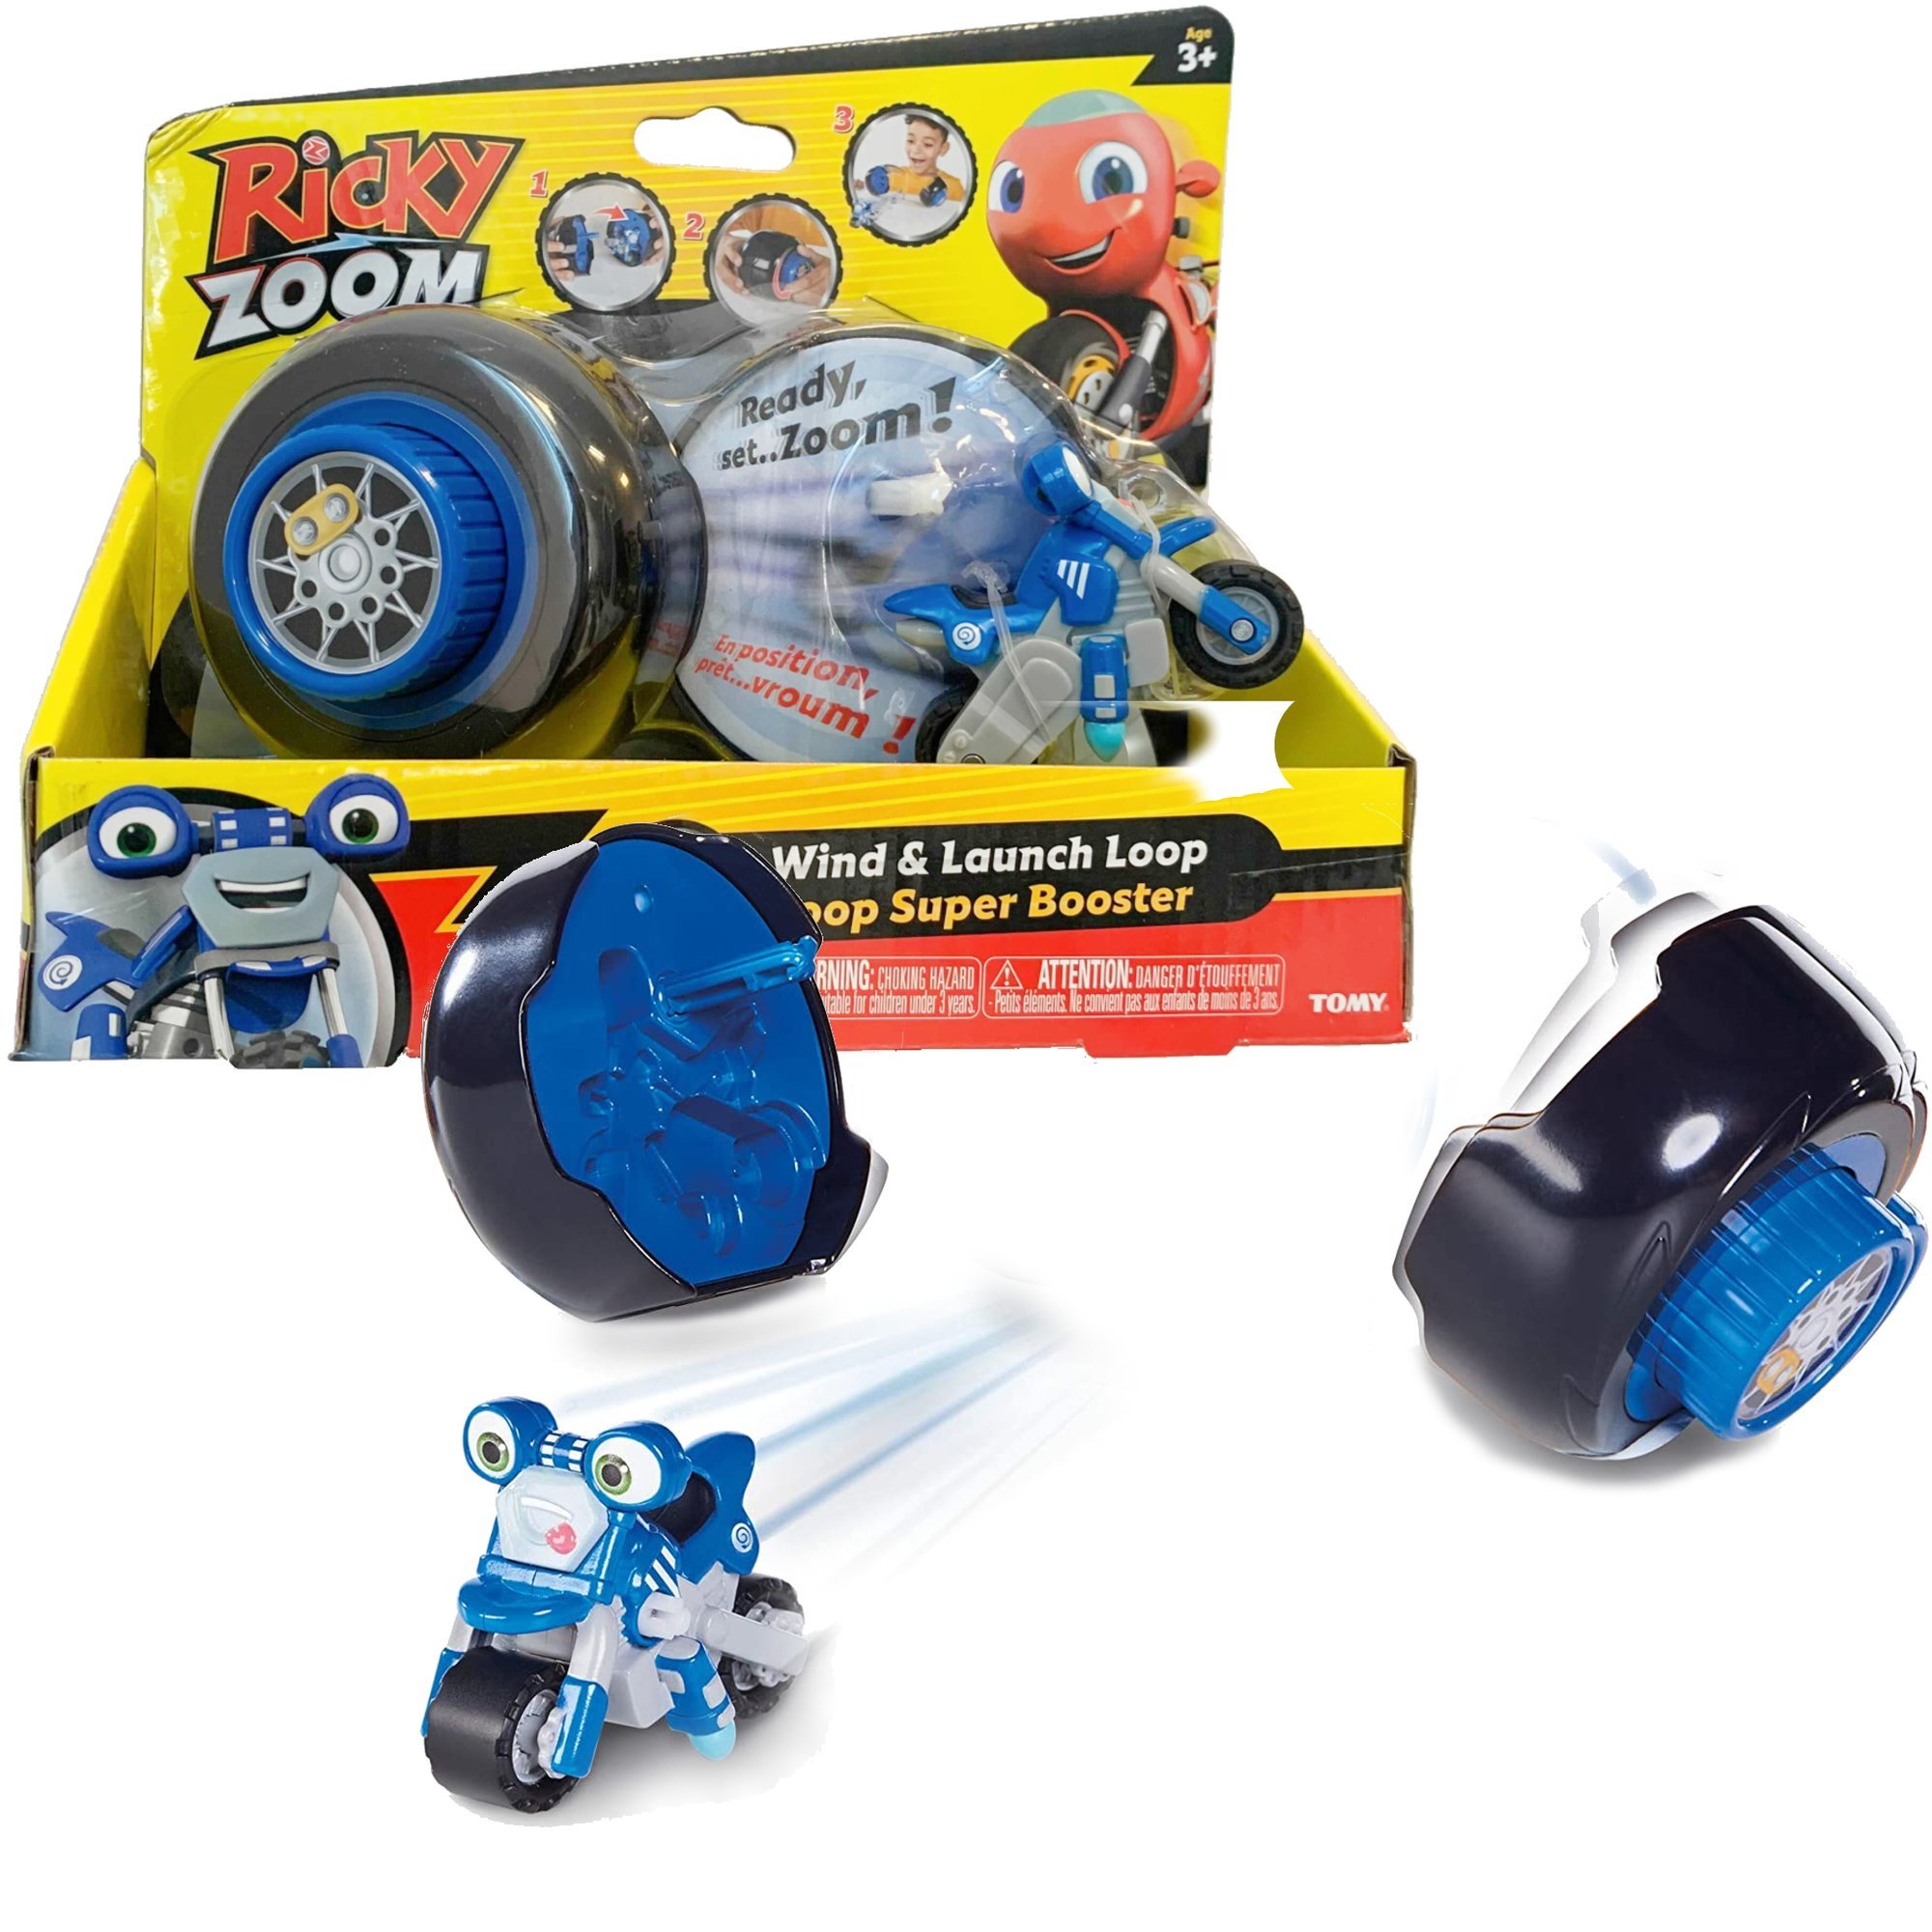 Tomy T20060 Ricky Zoom Loop Super Booster